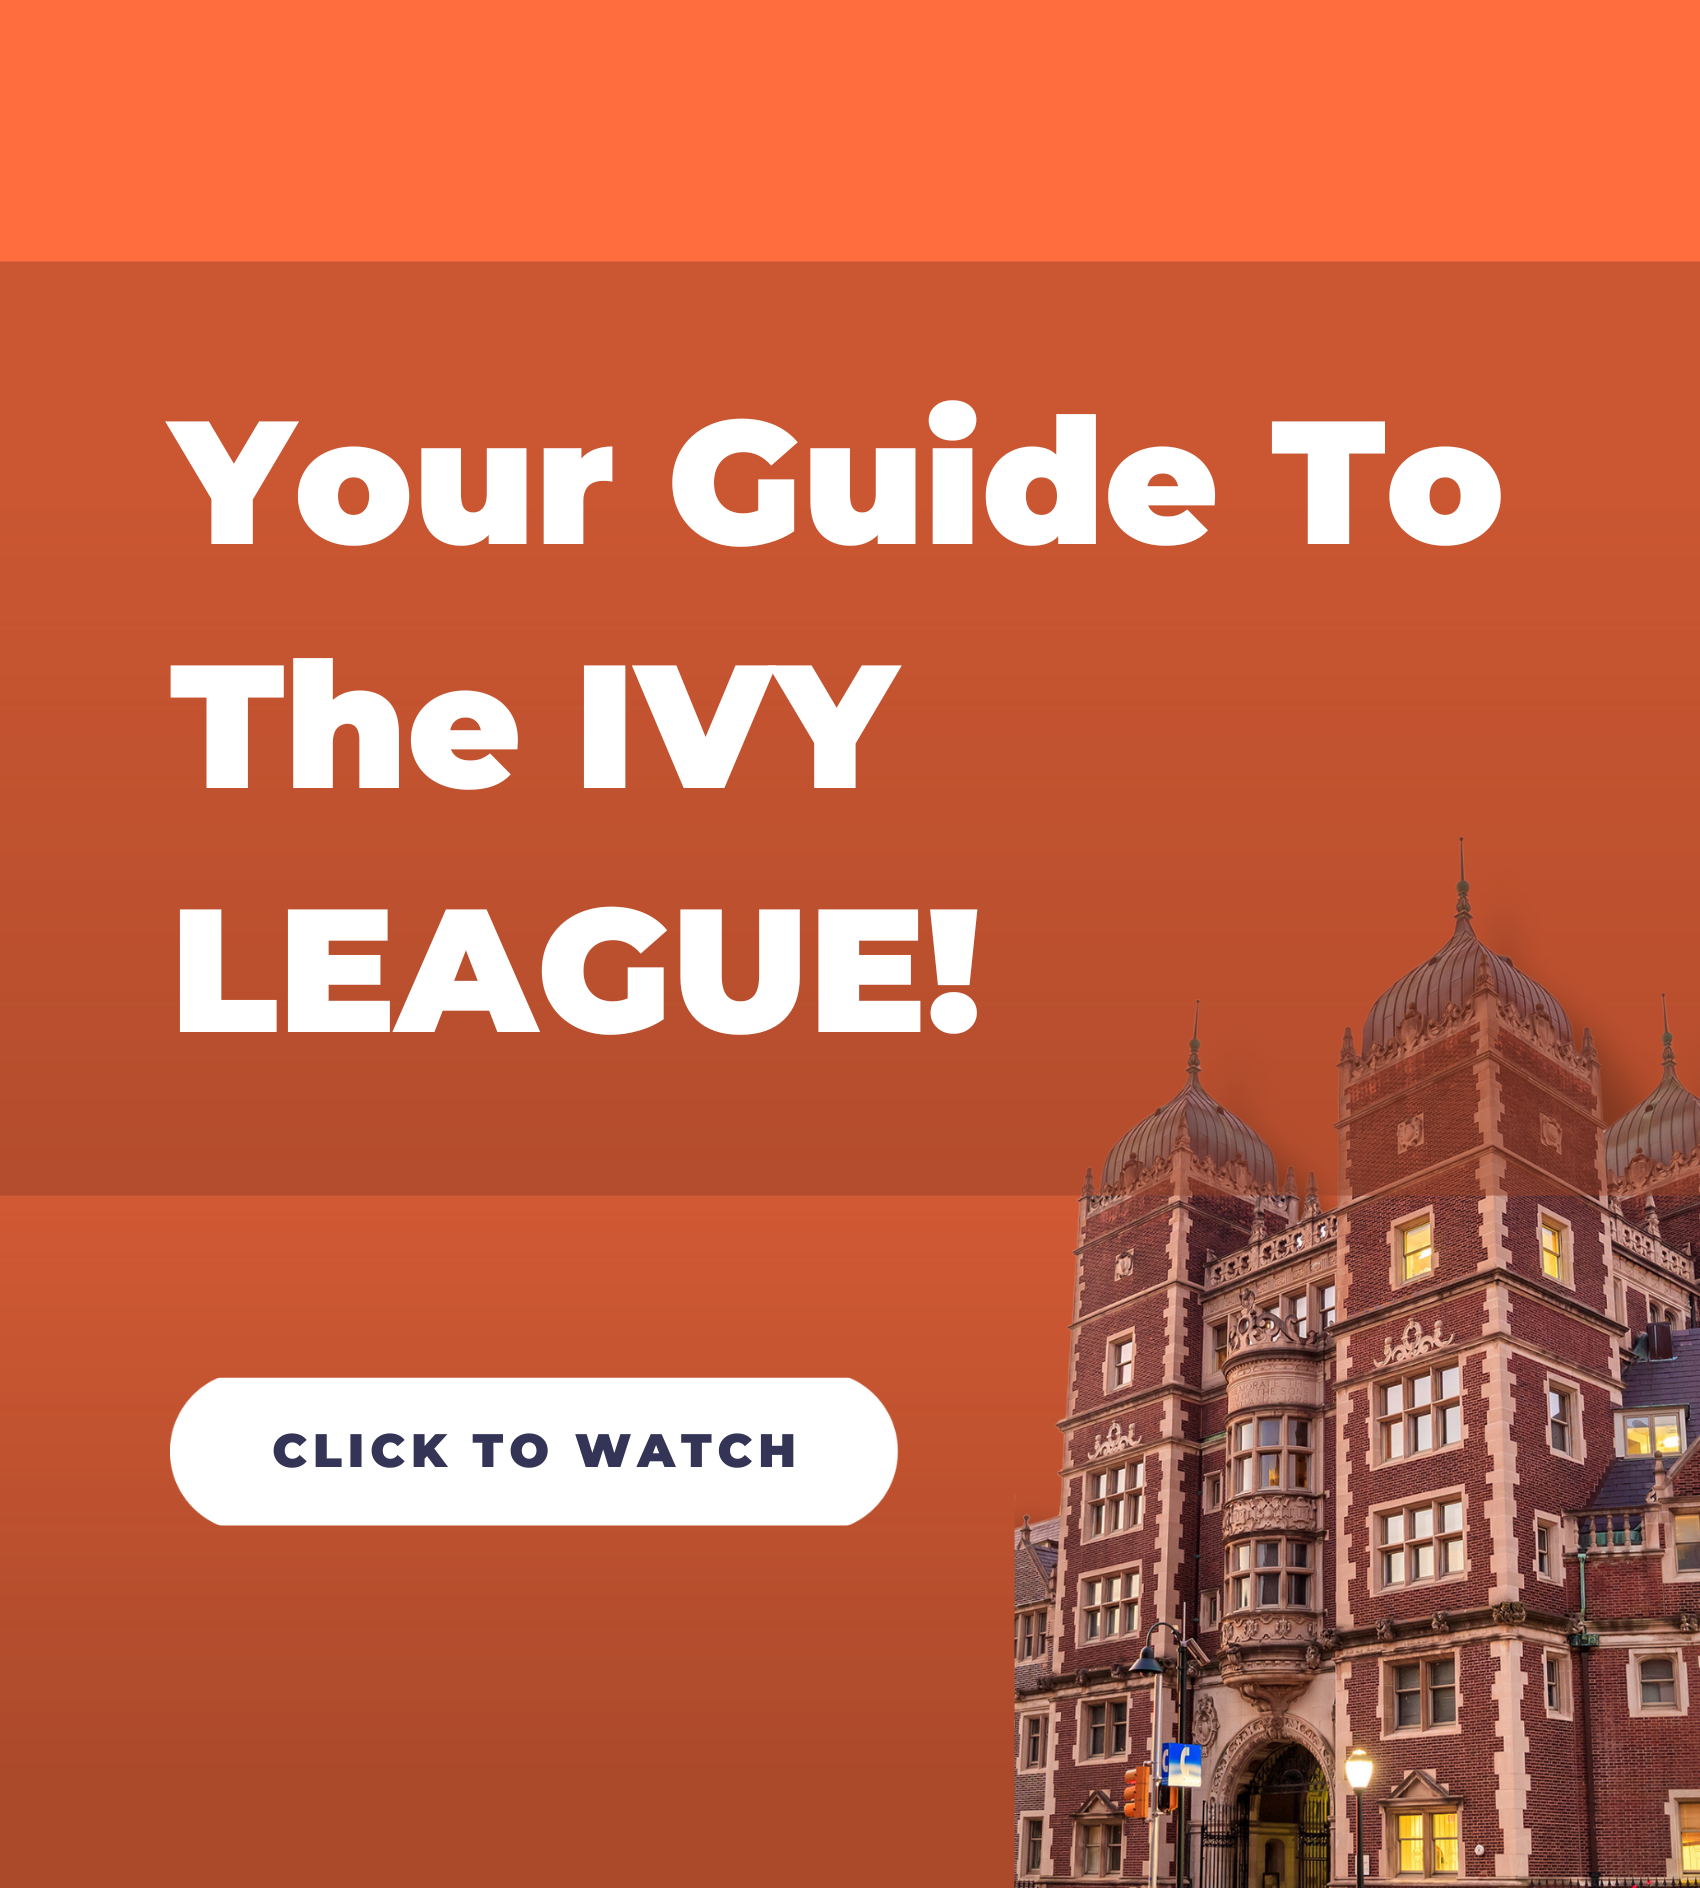 The Australian Students Guide To The Ivy League!